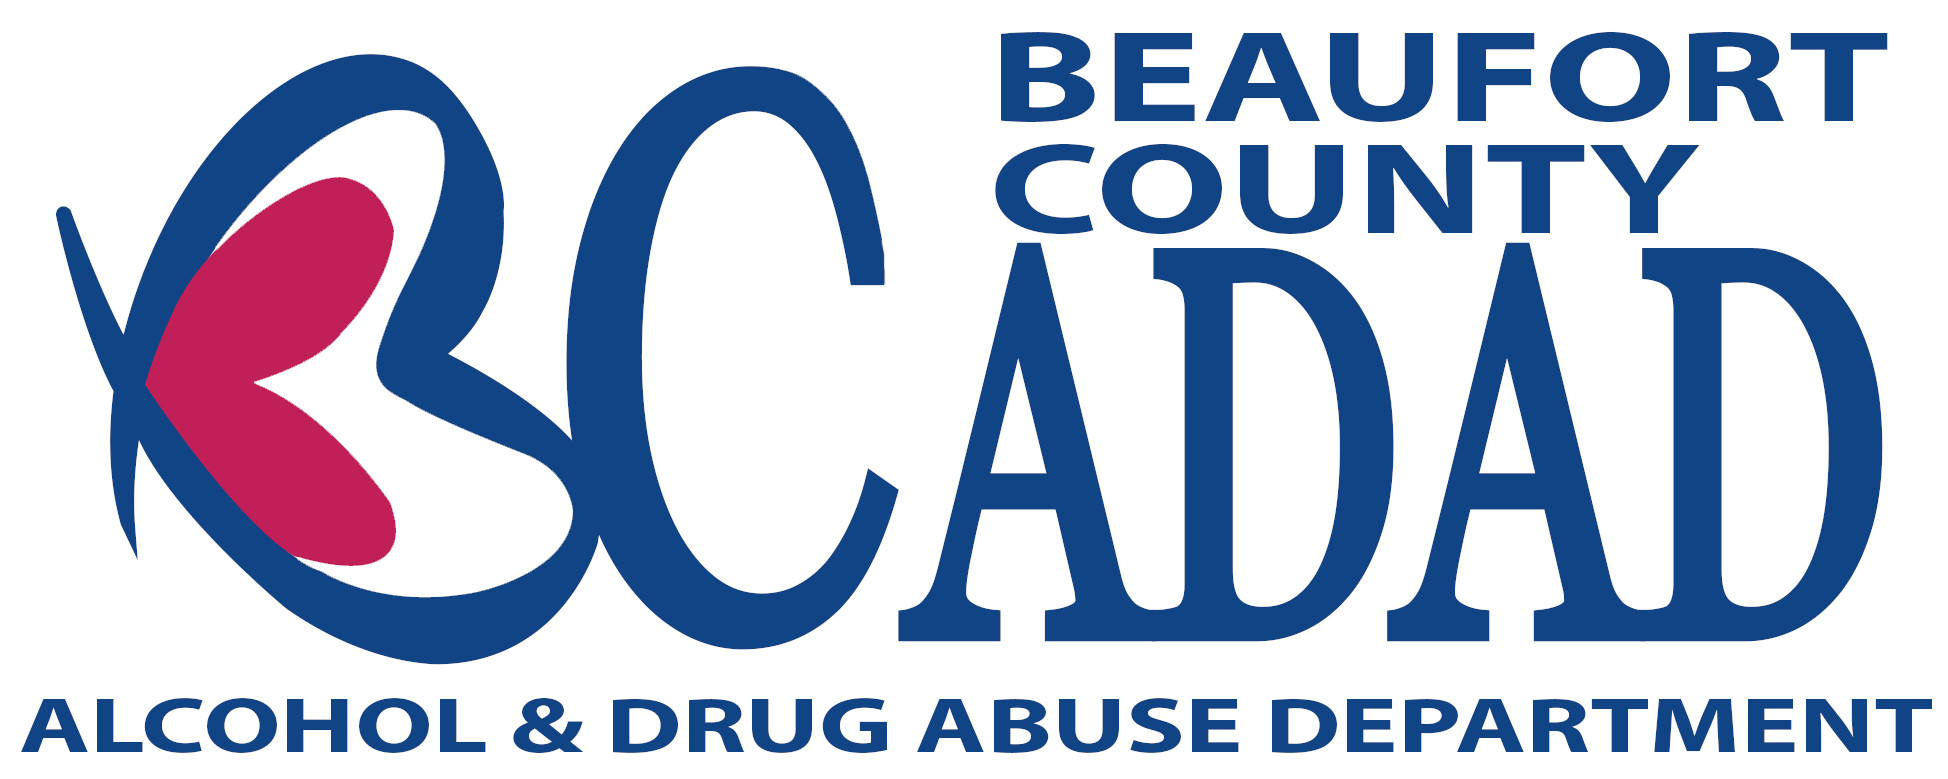 Beaufort County Alcohol and Drug Abuse Department Logo